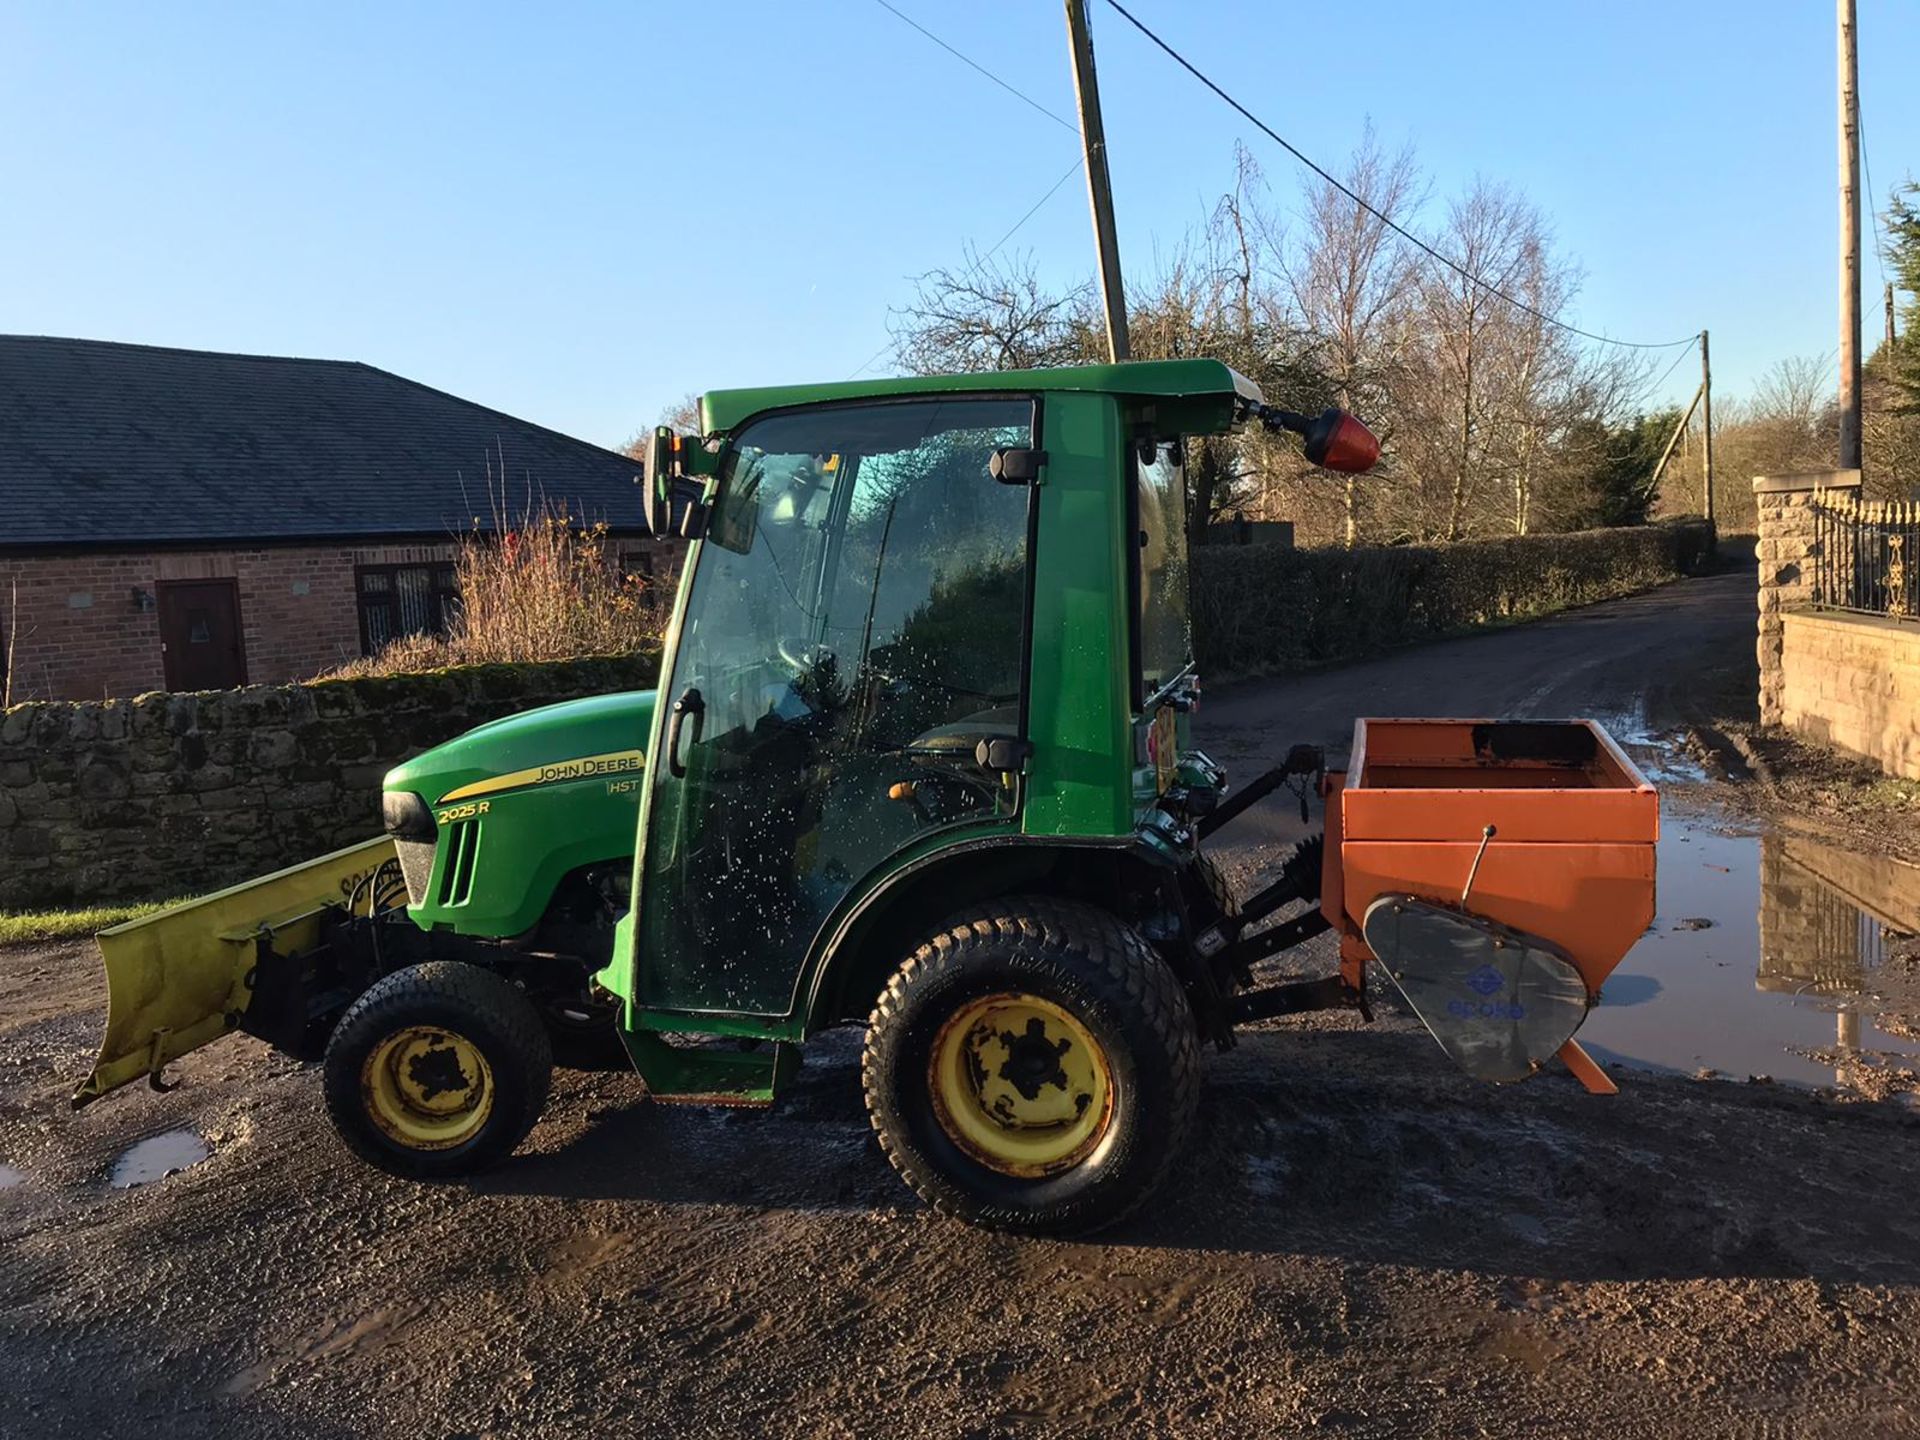 JOHN DEERE 2025R COMPACT TRACTOR, YEAR 2014, FRONT HYDRAULICS, TILT BLADE, FULL CAB C/W REAR GRITTER - Image 3 of 5